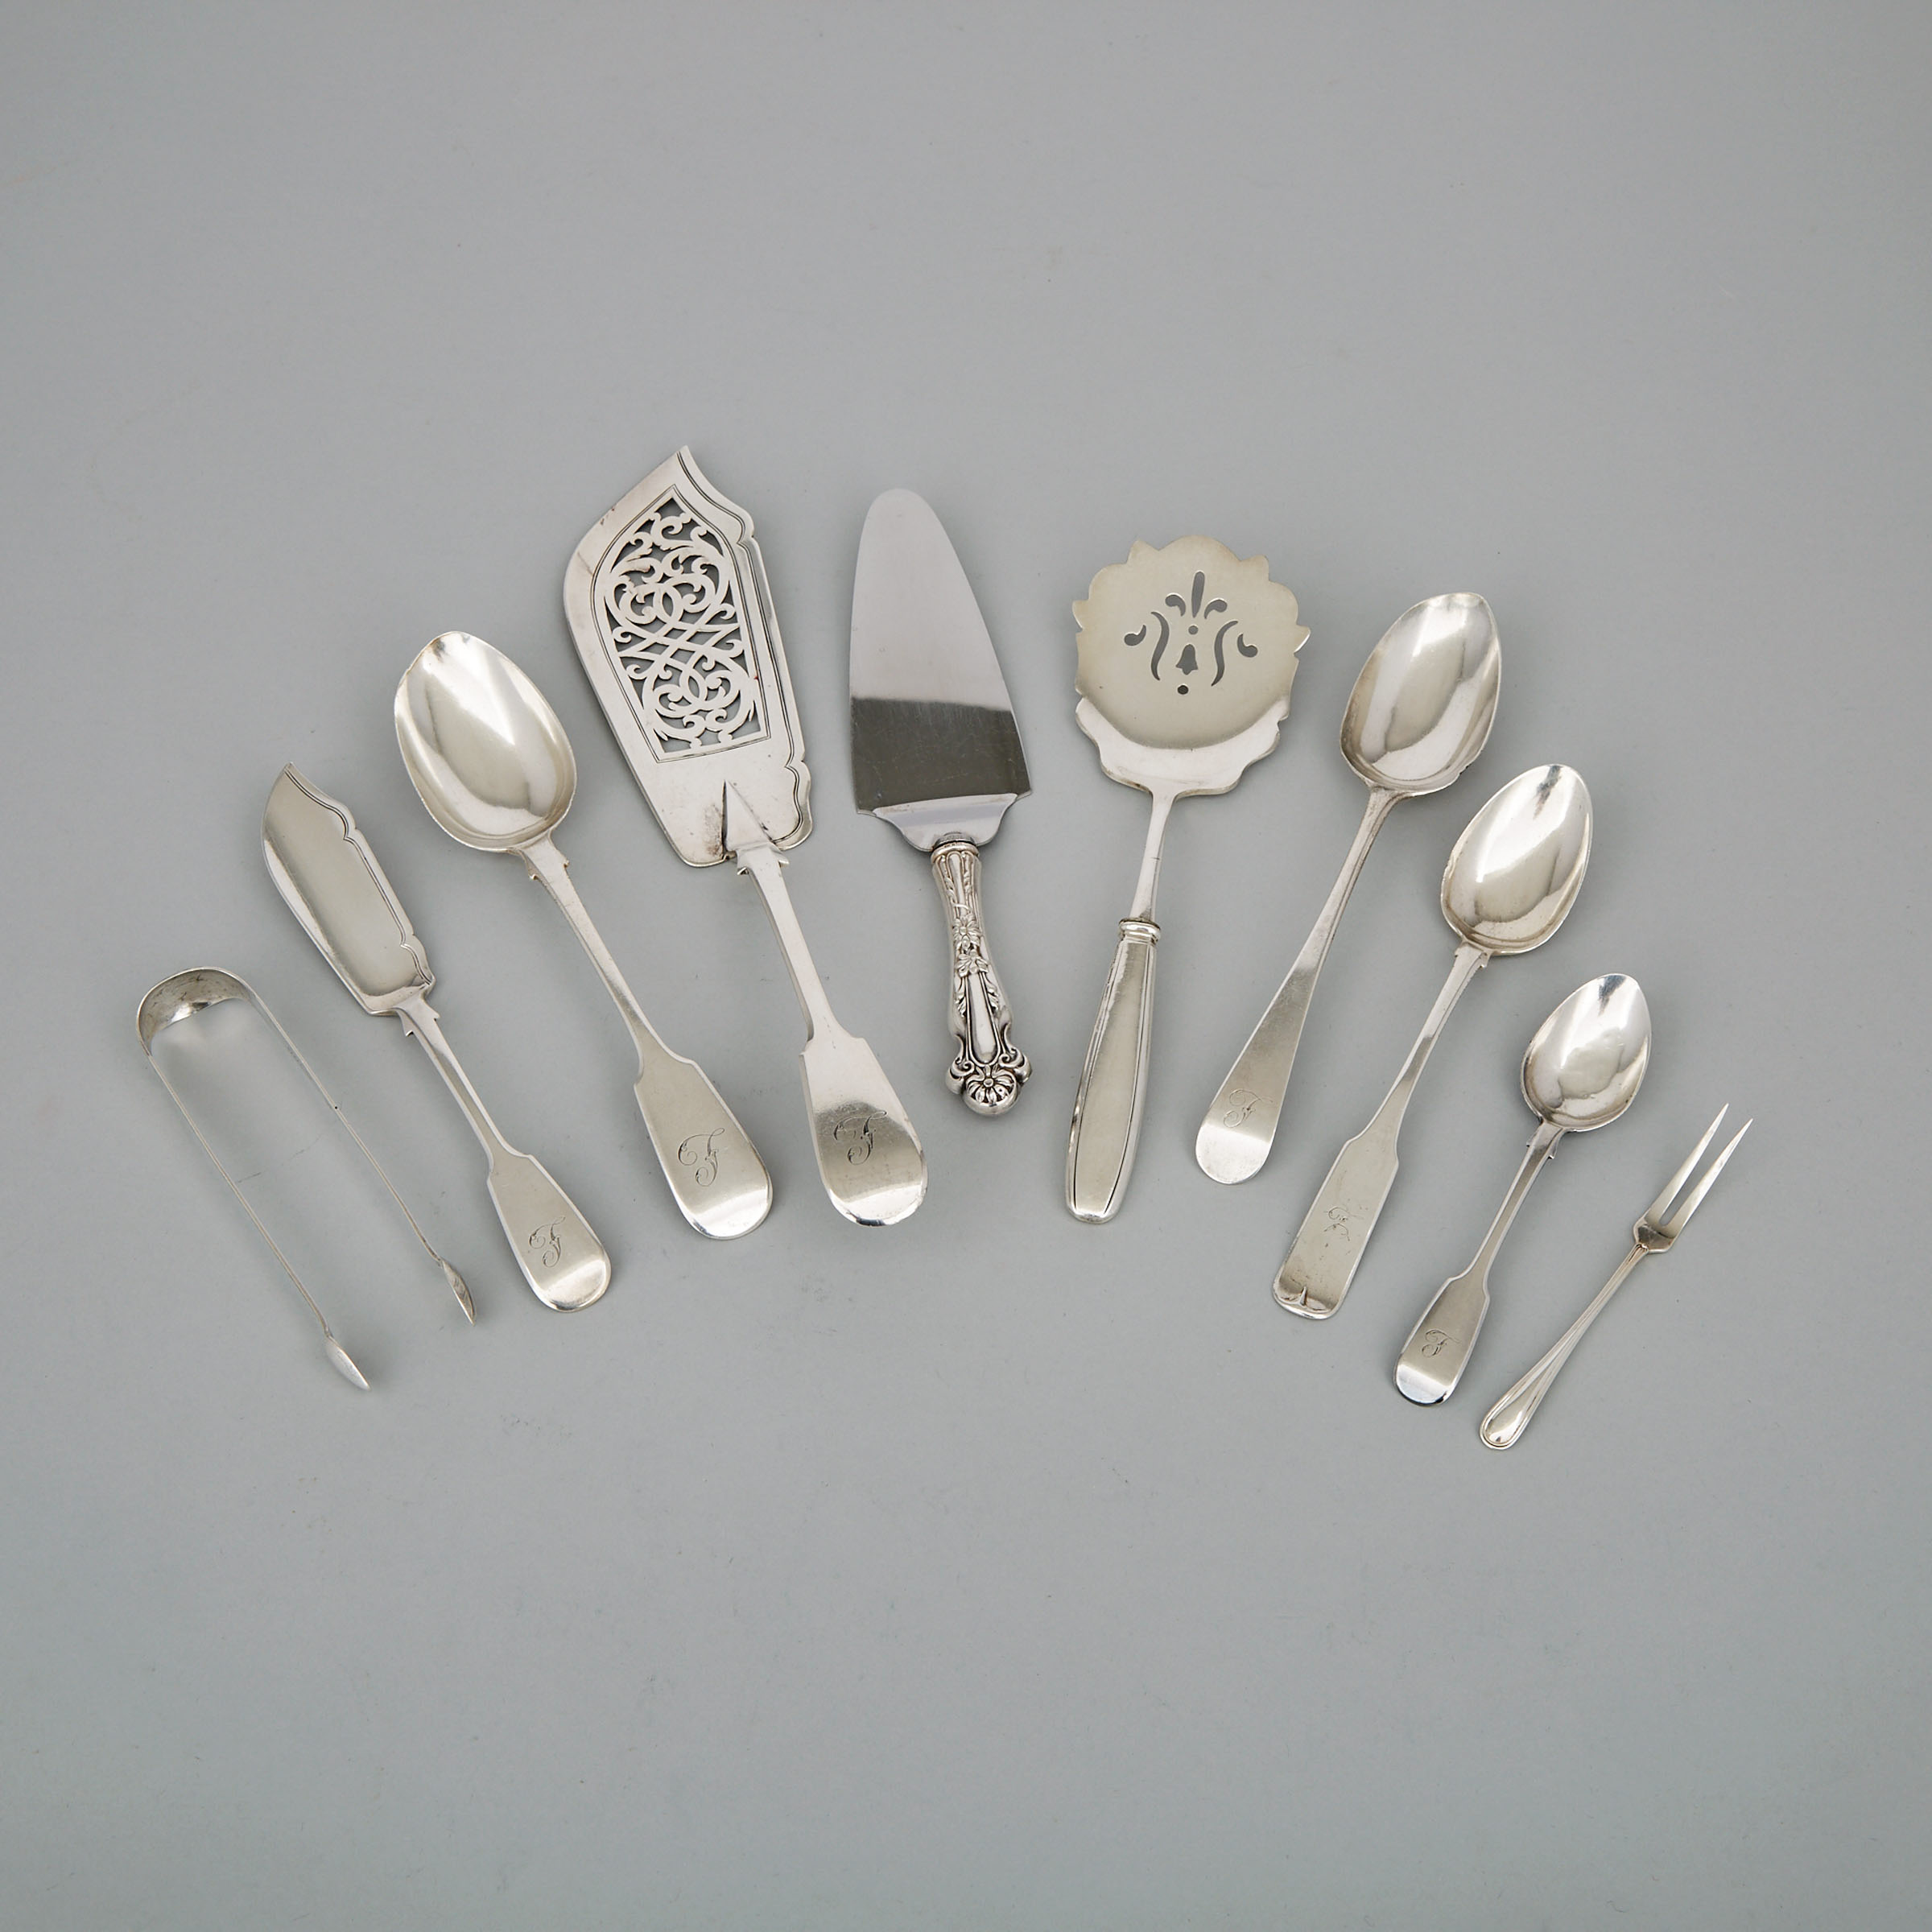 Group of English and North American Silver Flatware, 19th/20th century